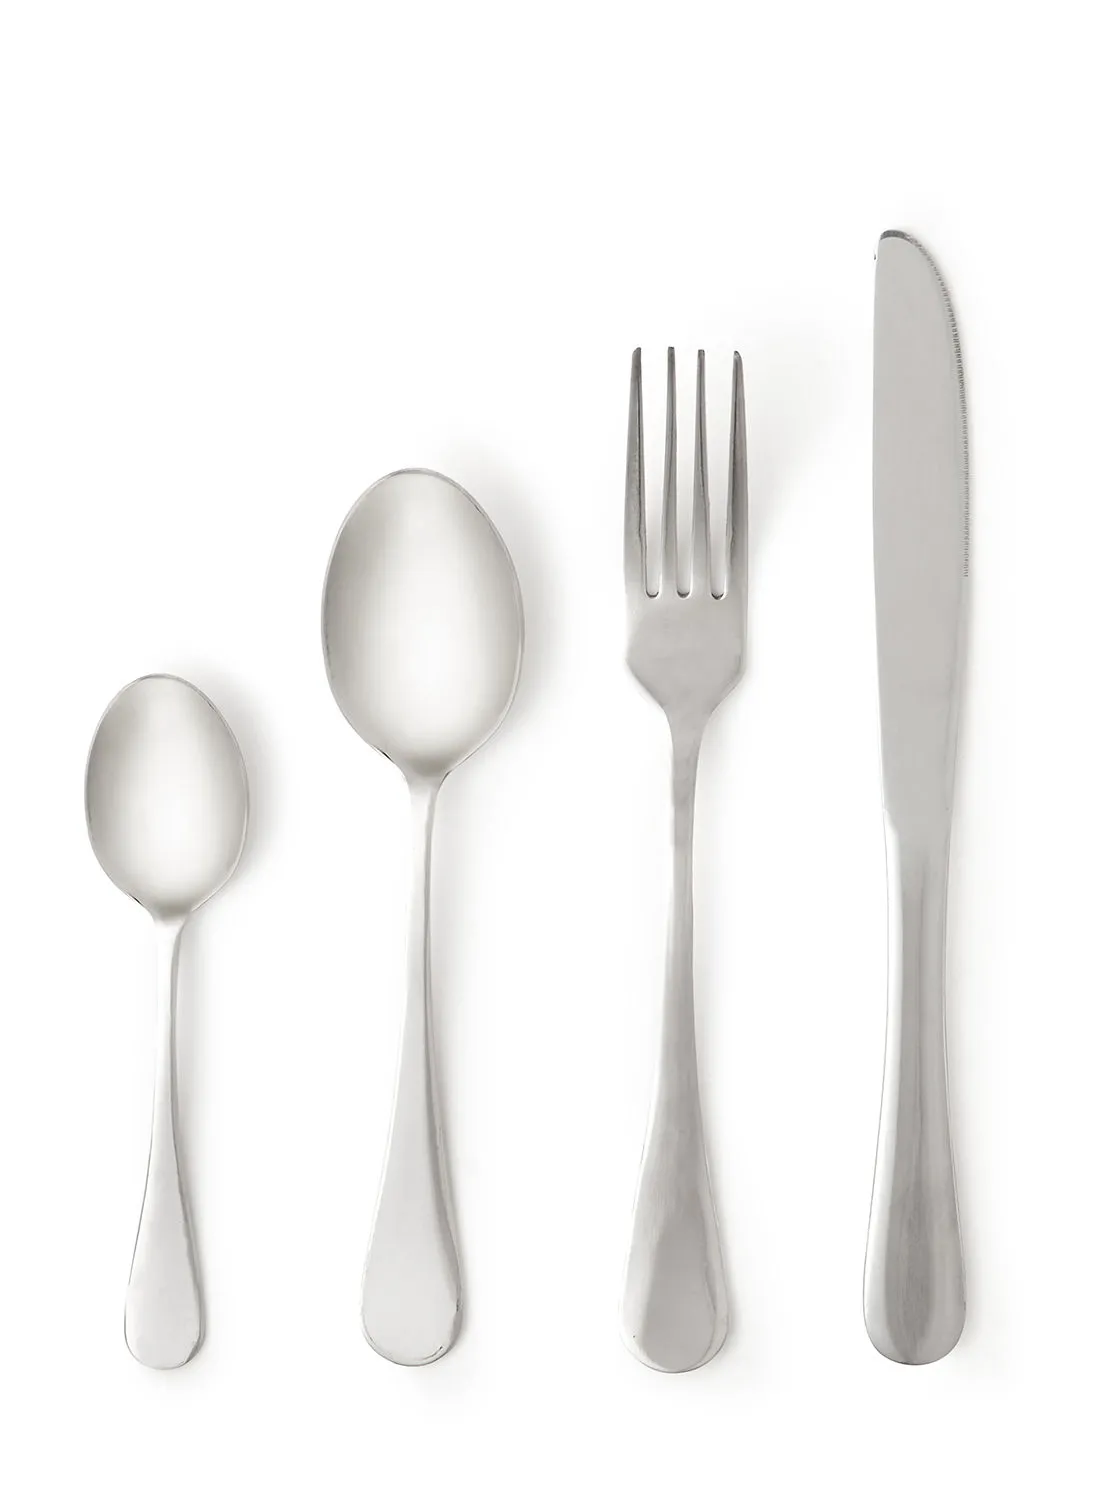 noon east 24 Piece Cutlery Set - Made Of Stainless Steel - Silverware Flatware - Spoons And Forks Set, Spoon Set - Table Spoons, Tea Spoons, Forks, Knives - Serves 6 - Design Silver Melody